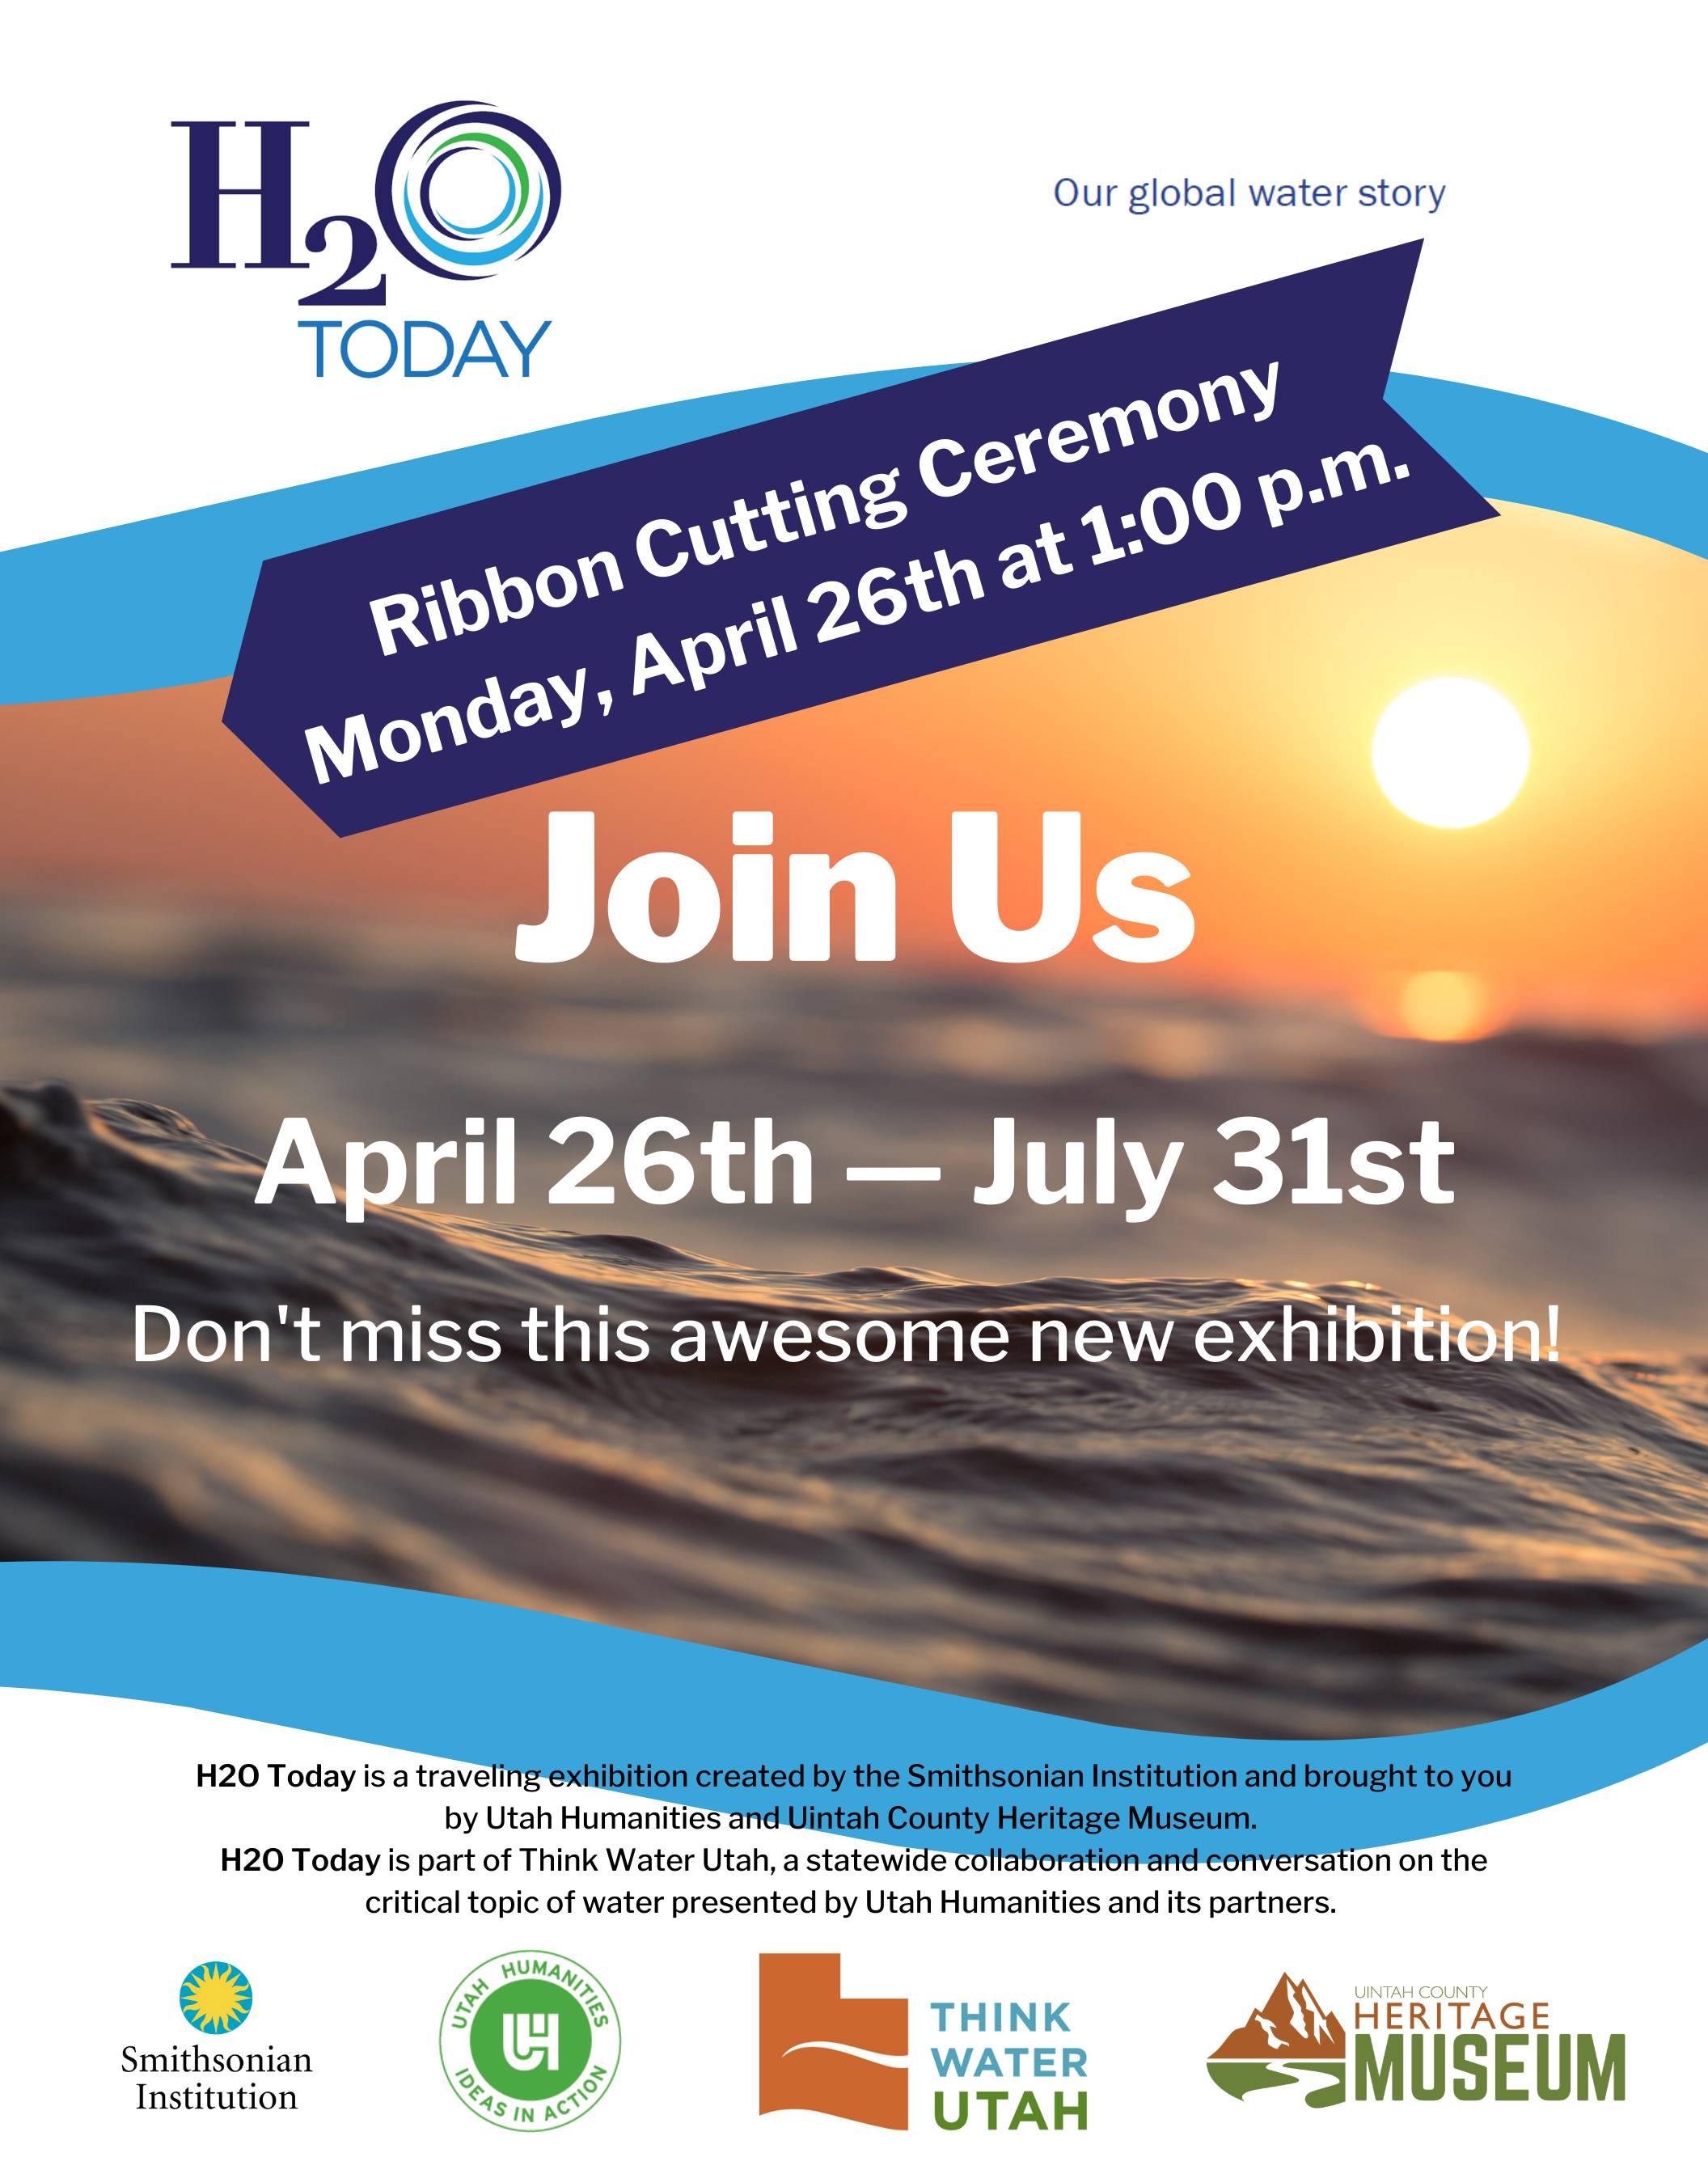 H2O Today: Ribbon Cutting Ceremony Monday, April 26th at 1:00 p.m. Join Us April 26th - July 31st Don't miss this awesome new exhibition! H2O Today is a traveling exhibition created by the Smithsonian Institution and brought to you by Utah Humanities and Uintah County Heritage Museum.  H2O Today is part of Think Water Utah, a statewide collaboration and conversation on the critical topic of water presented by Utah Humanities and its partners. 